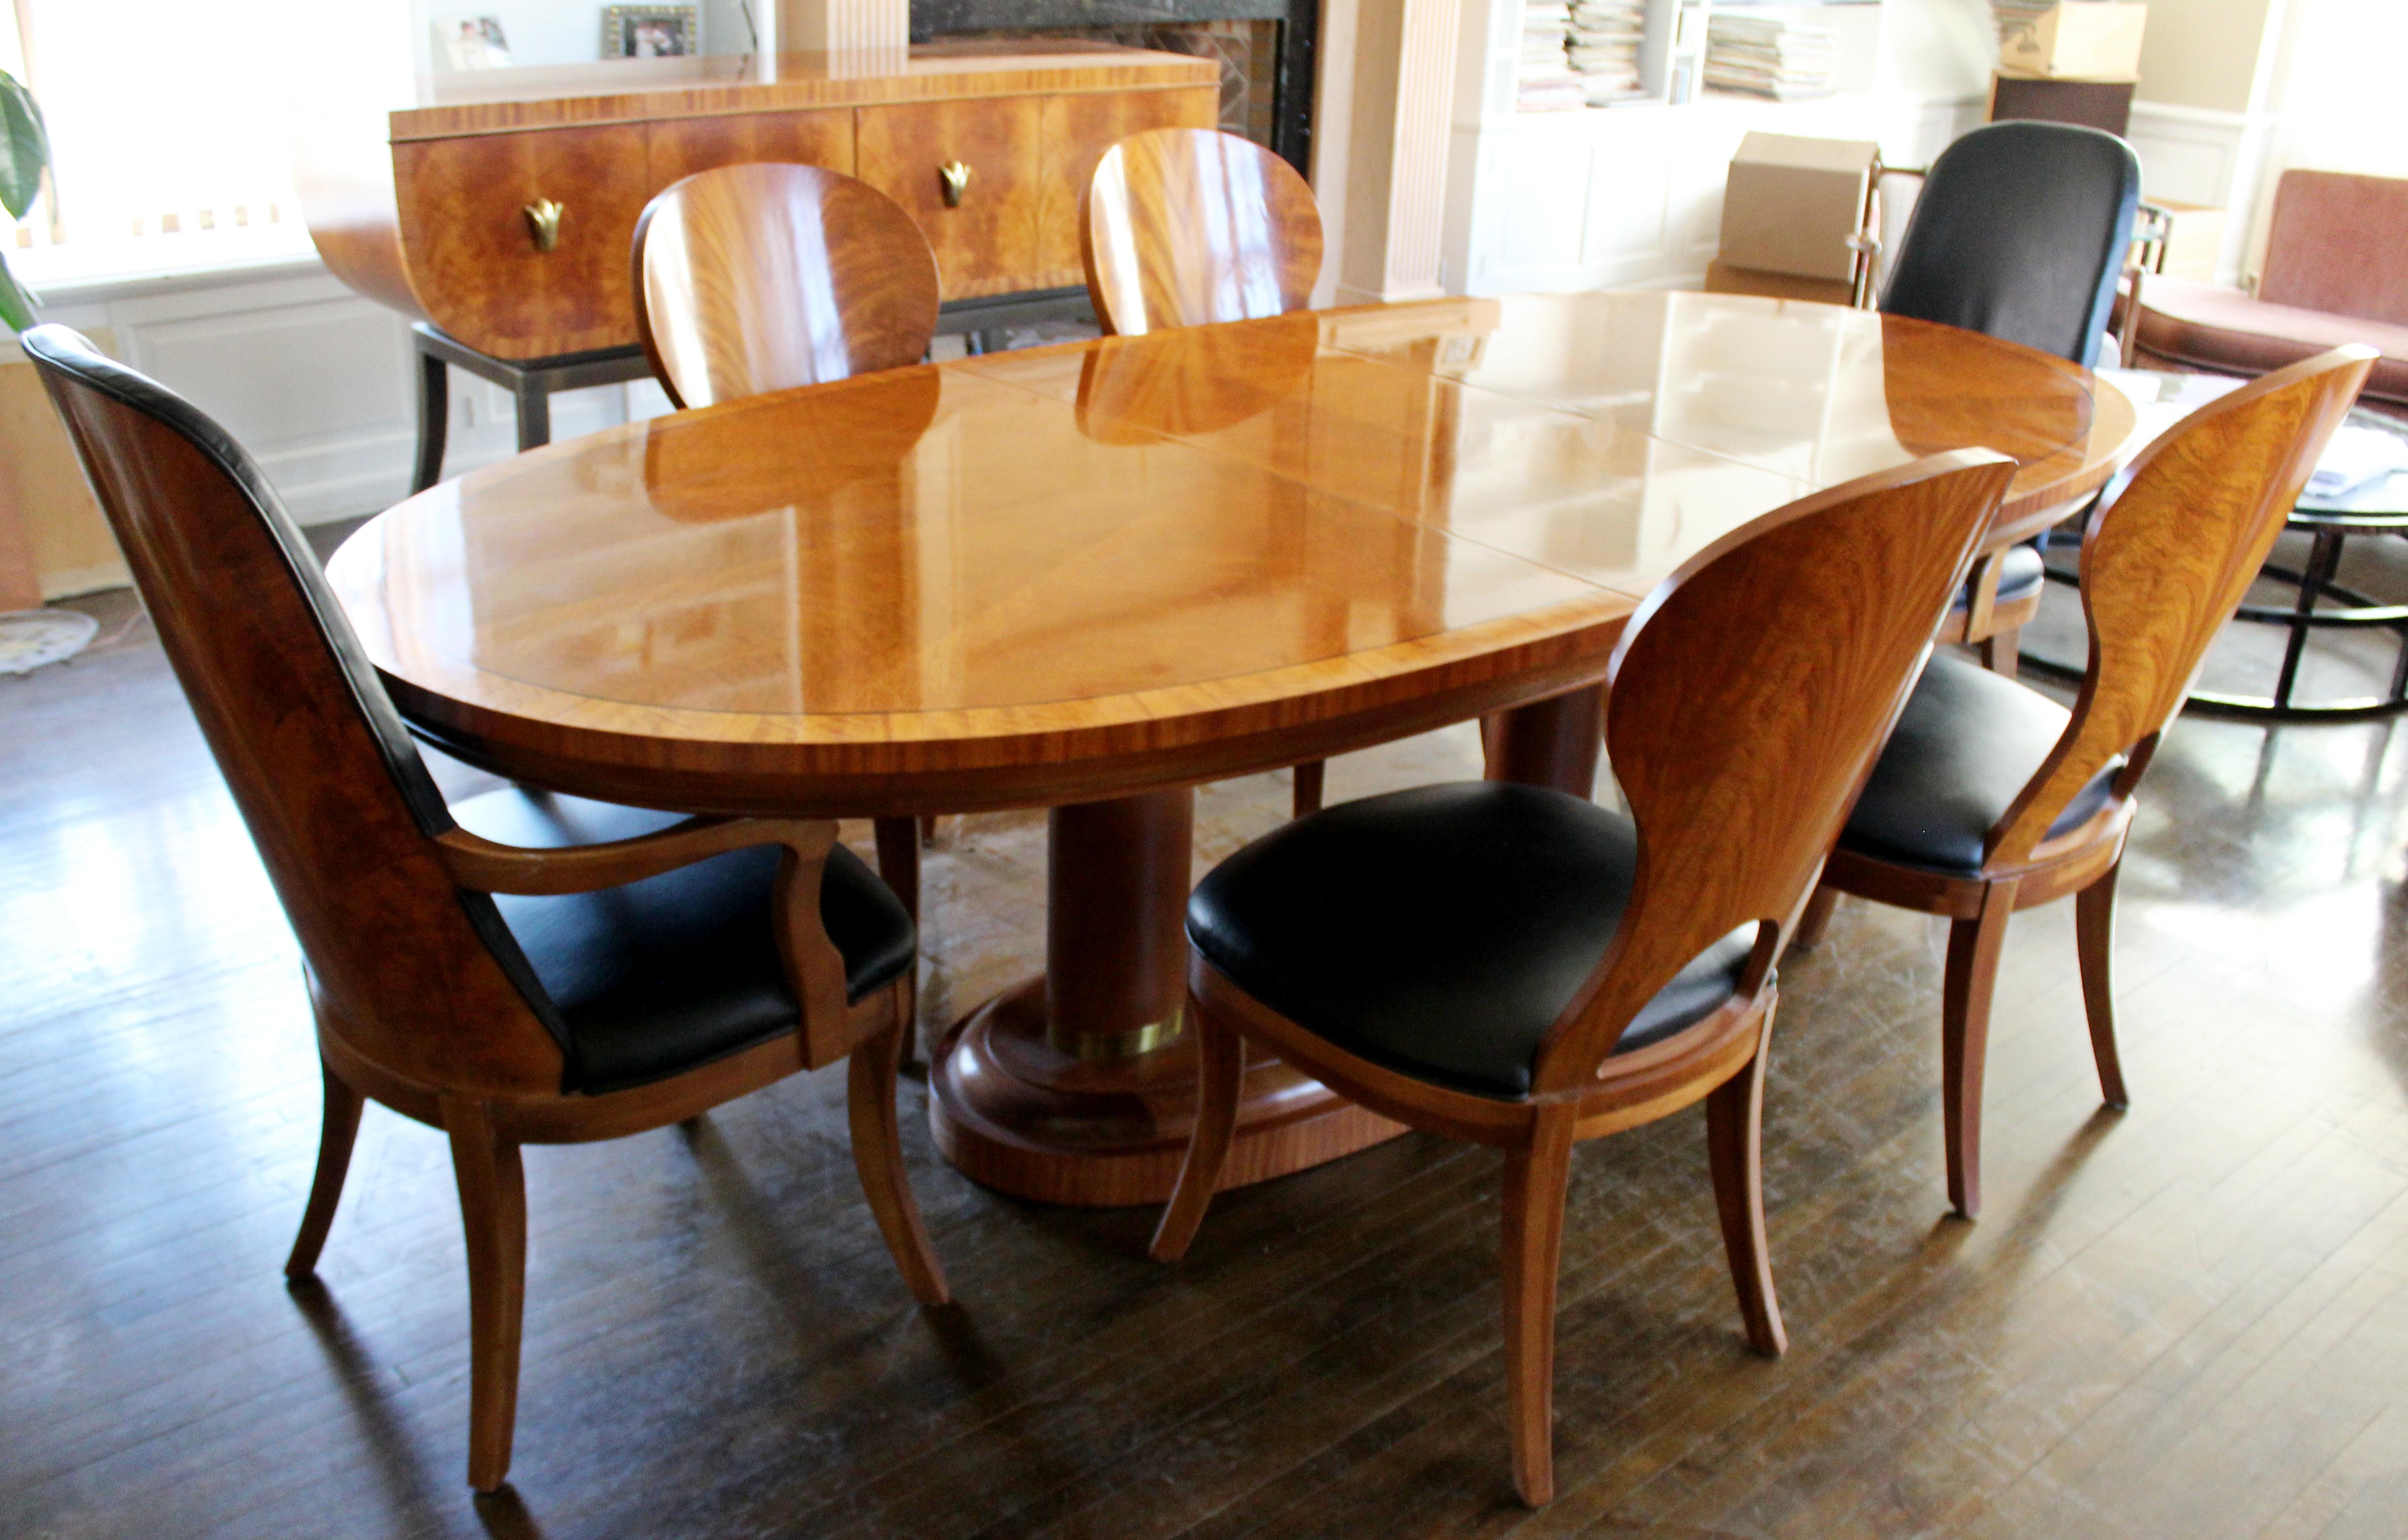 For your consideration is a truly sensational dining room set, including an expandable burl wood table and six chairs, two arm and four armless, and matching credenza, in the Art Deco style, by Henredon, circa the 1990s. In excellent vintage